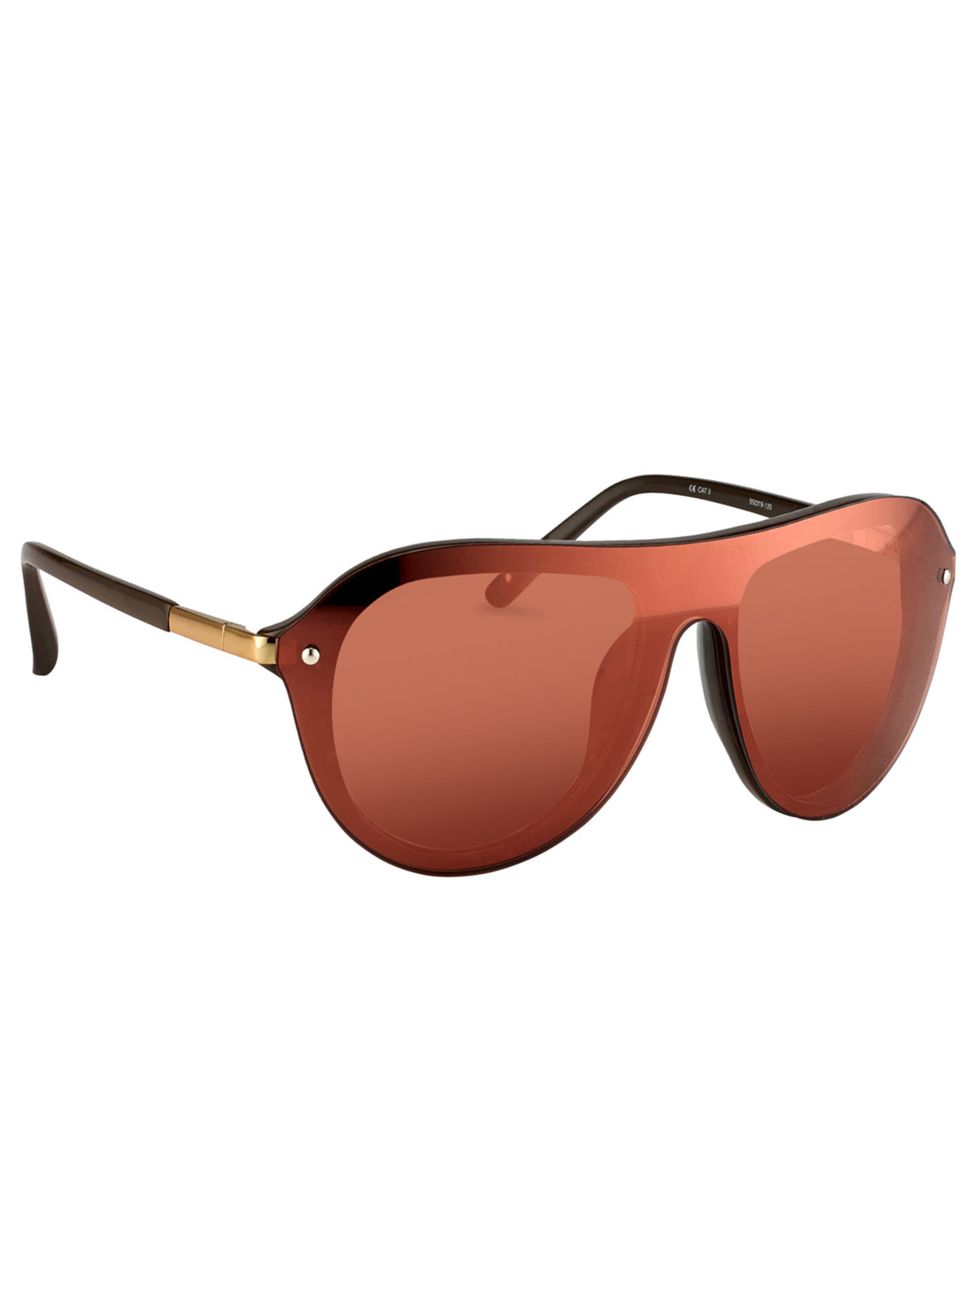 Eyewear, Vision care, Product, Brown, Sunglasses, Orange, Goggles, Line, Personal protective equipment, Amber, 